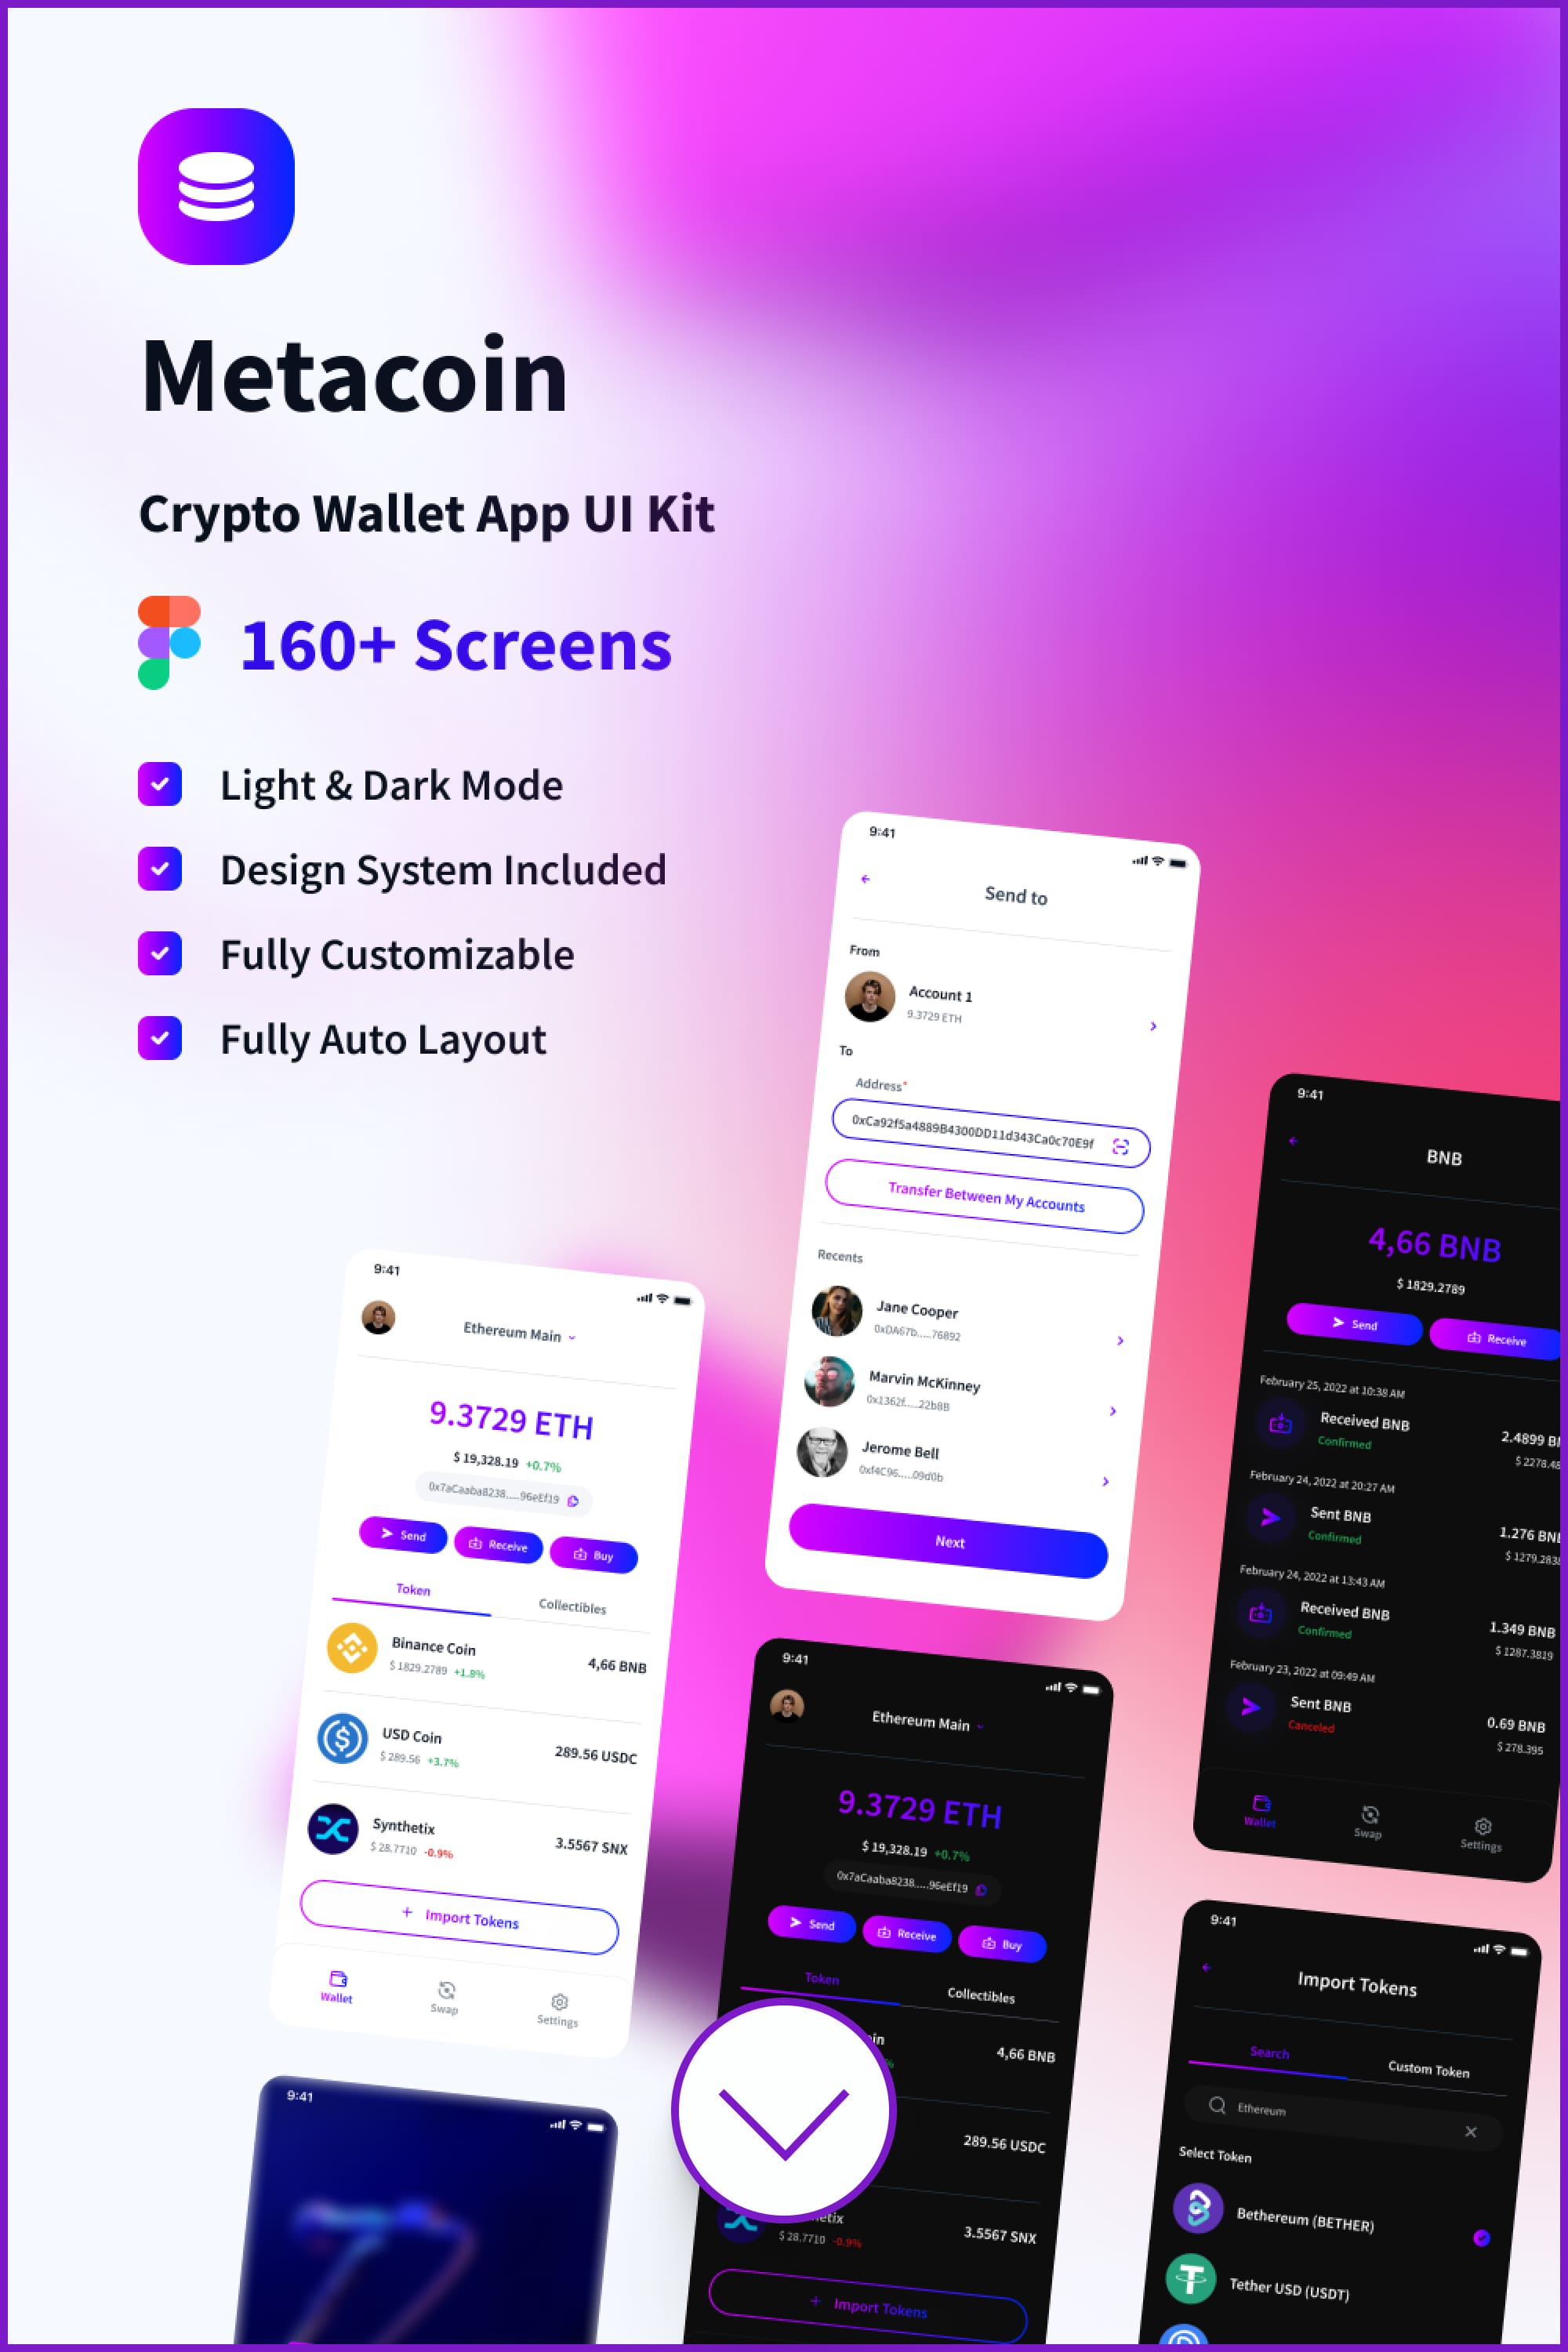 Screenshots of app for crypto in black and white colors.